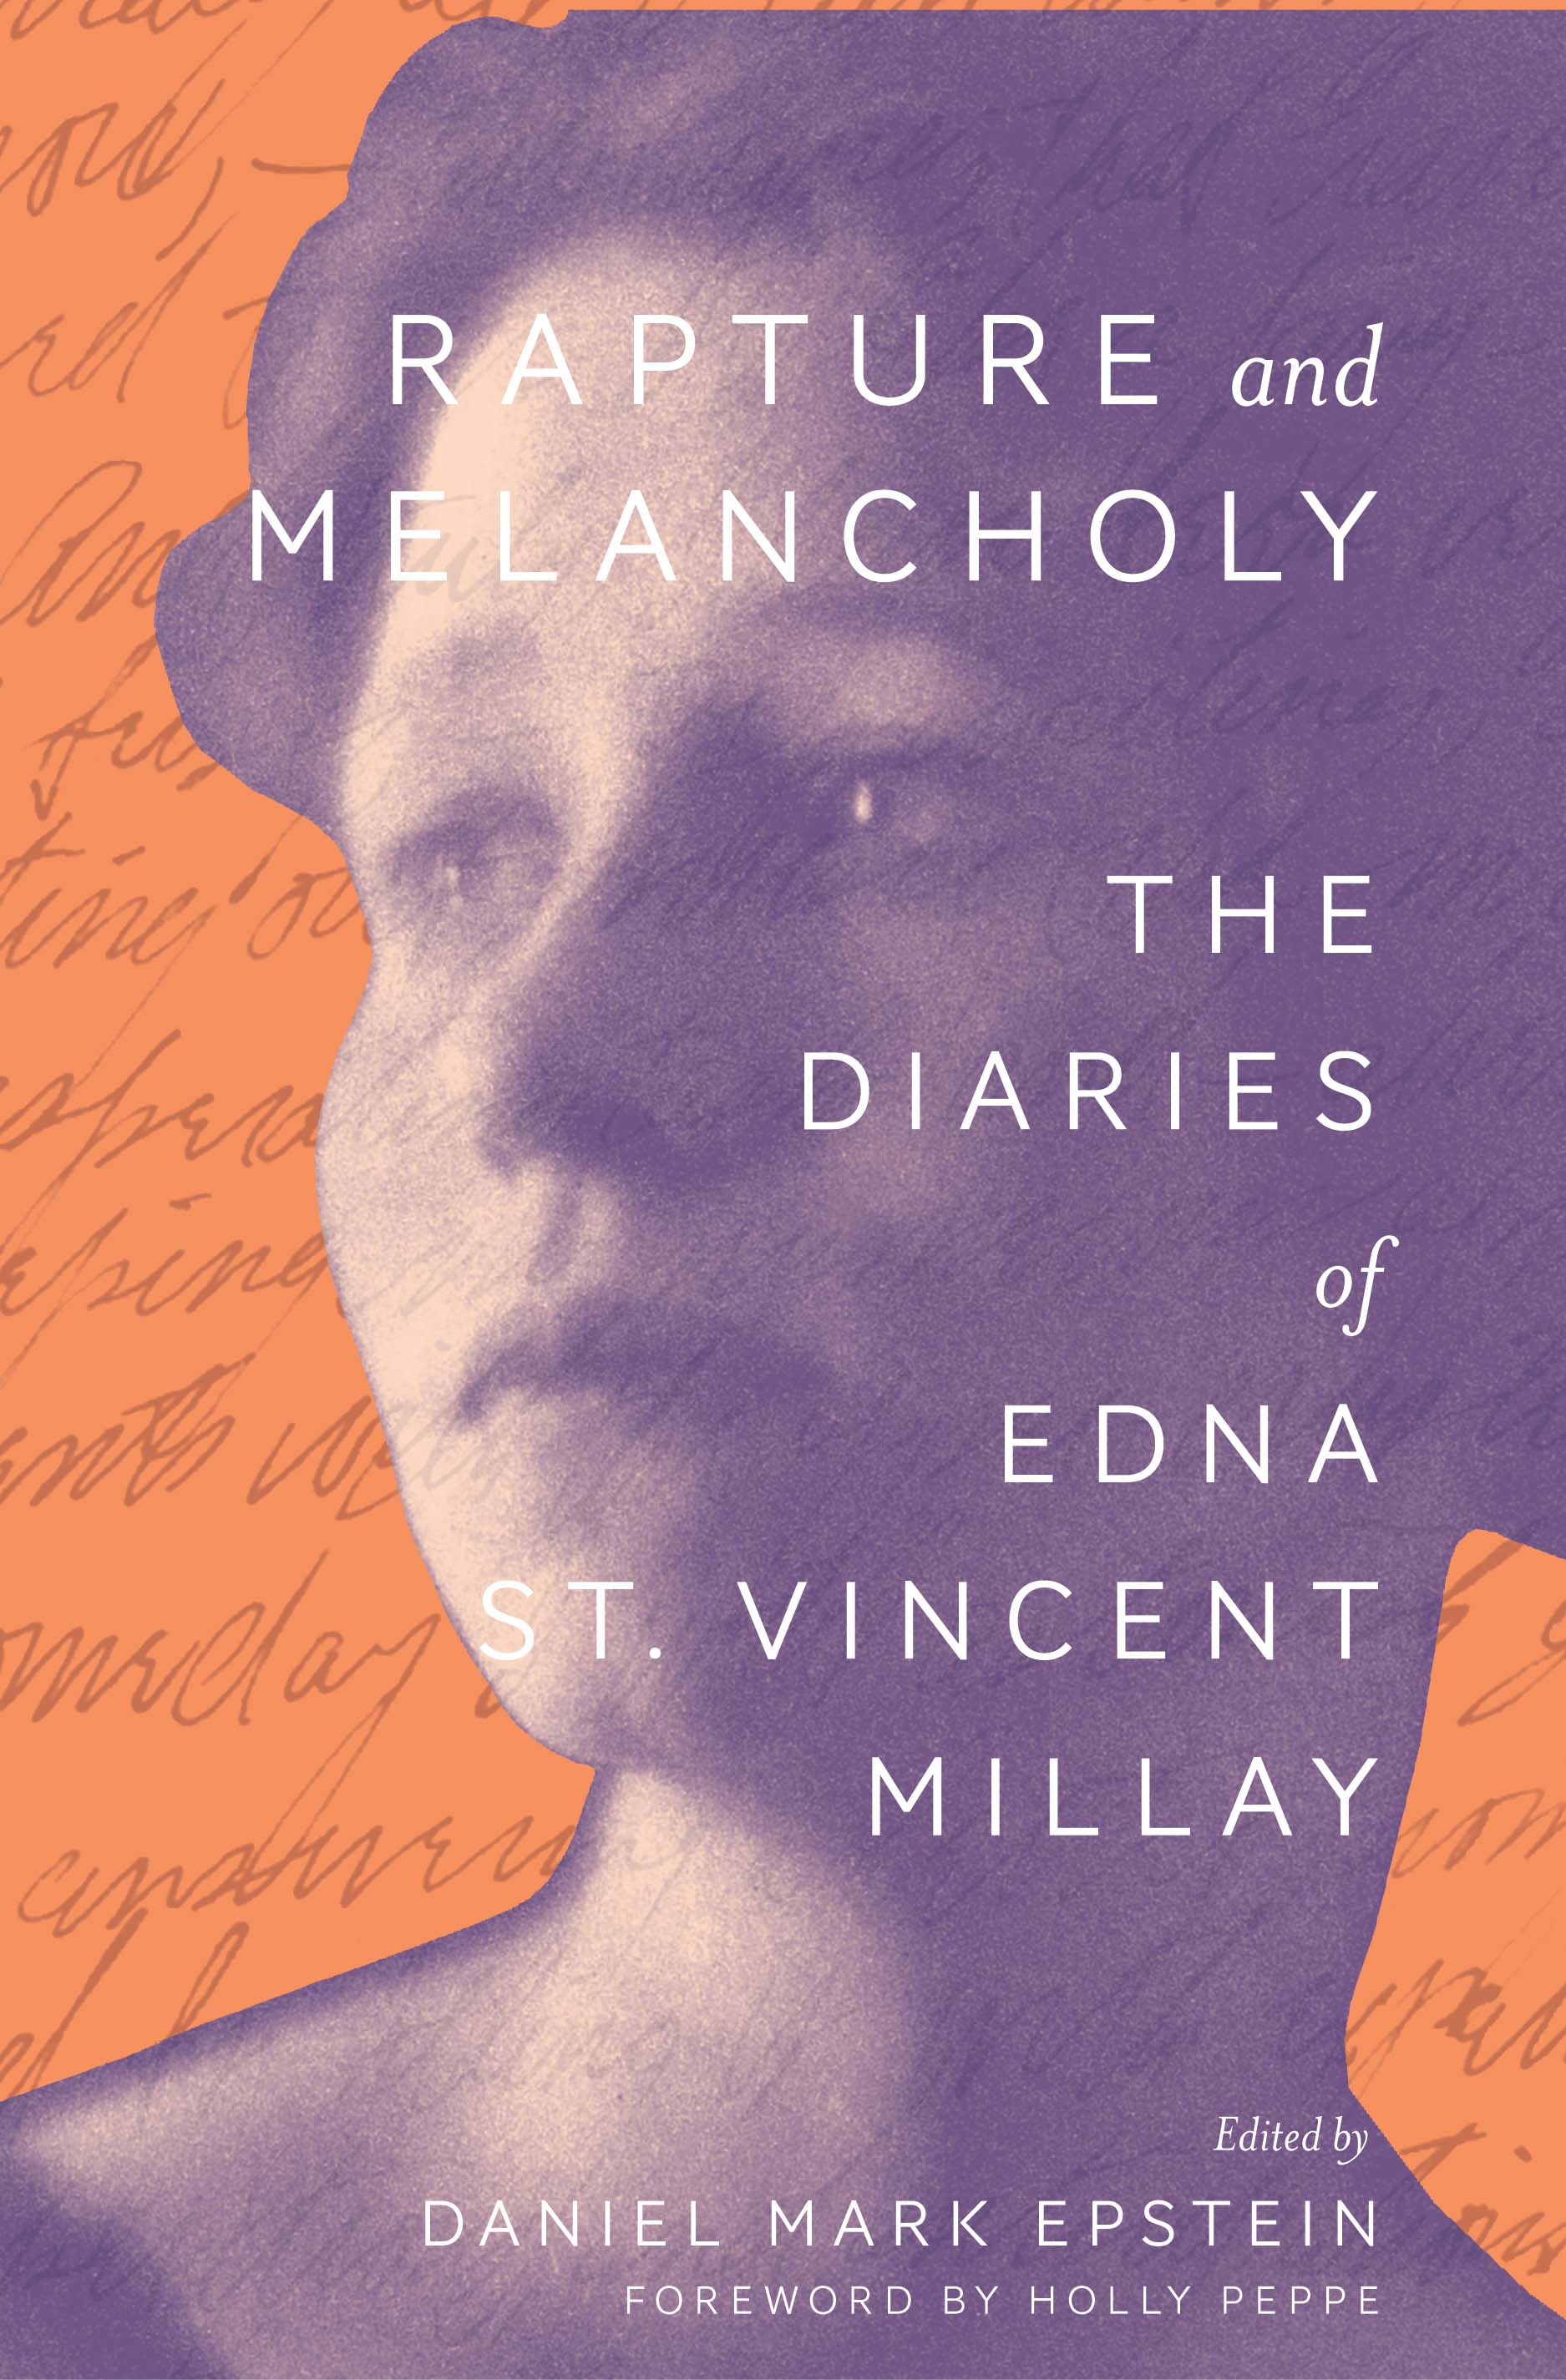 Rapture and Melancholy: The Diaries of Edna St. Vincent Millay PDF